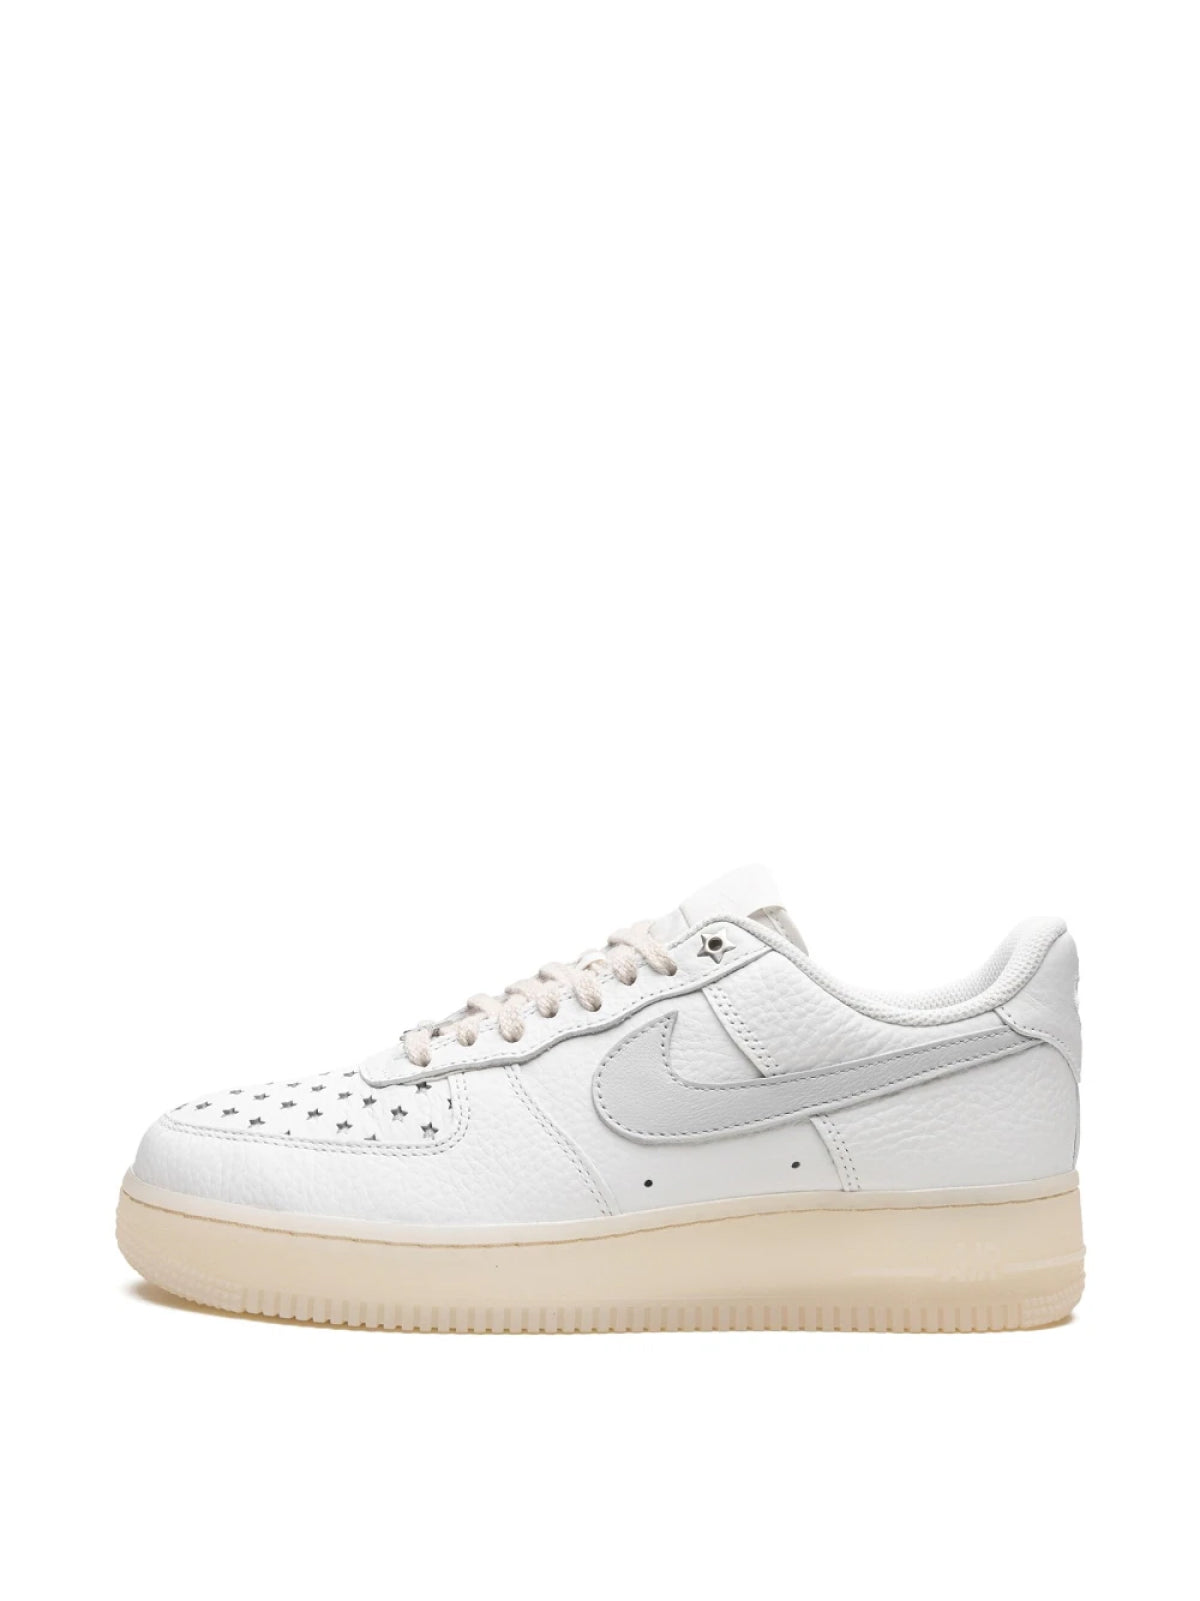 Nike-OUTLET-SALE-Air Force 1 '07 Sneakers-ARCHIVIST